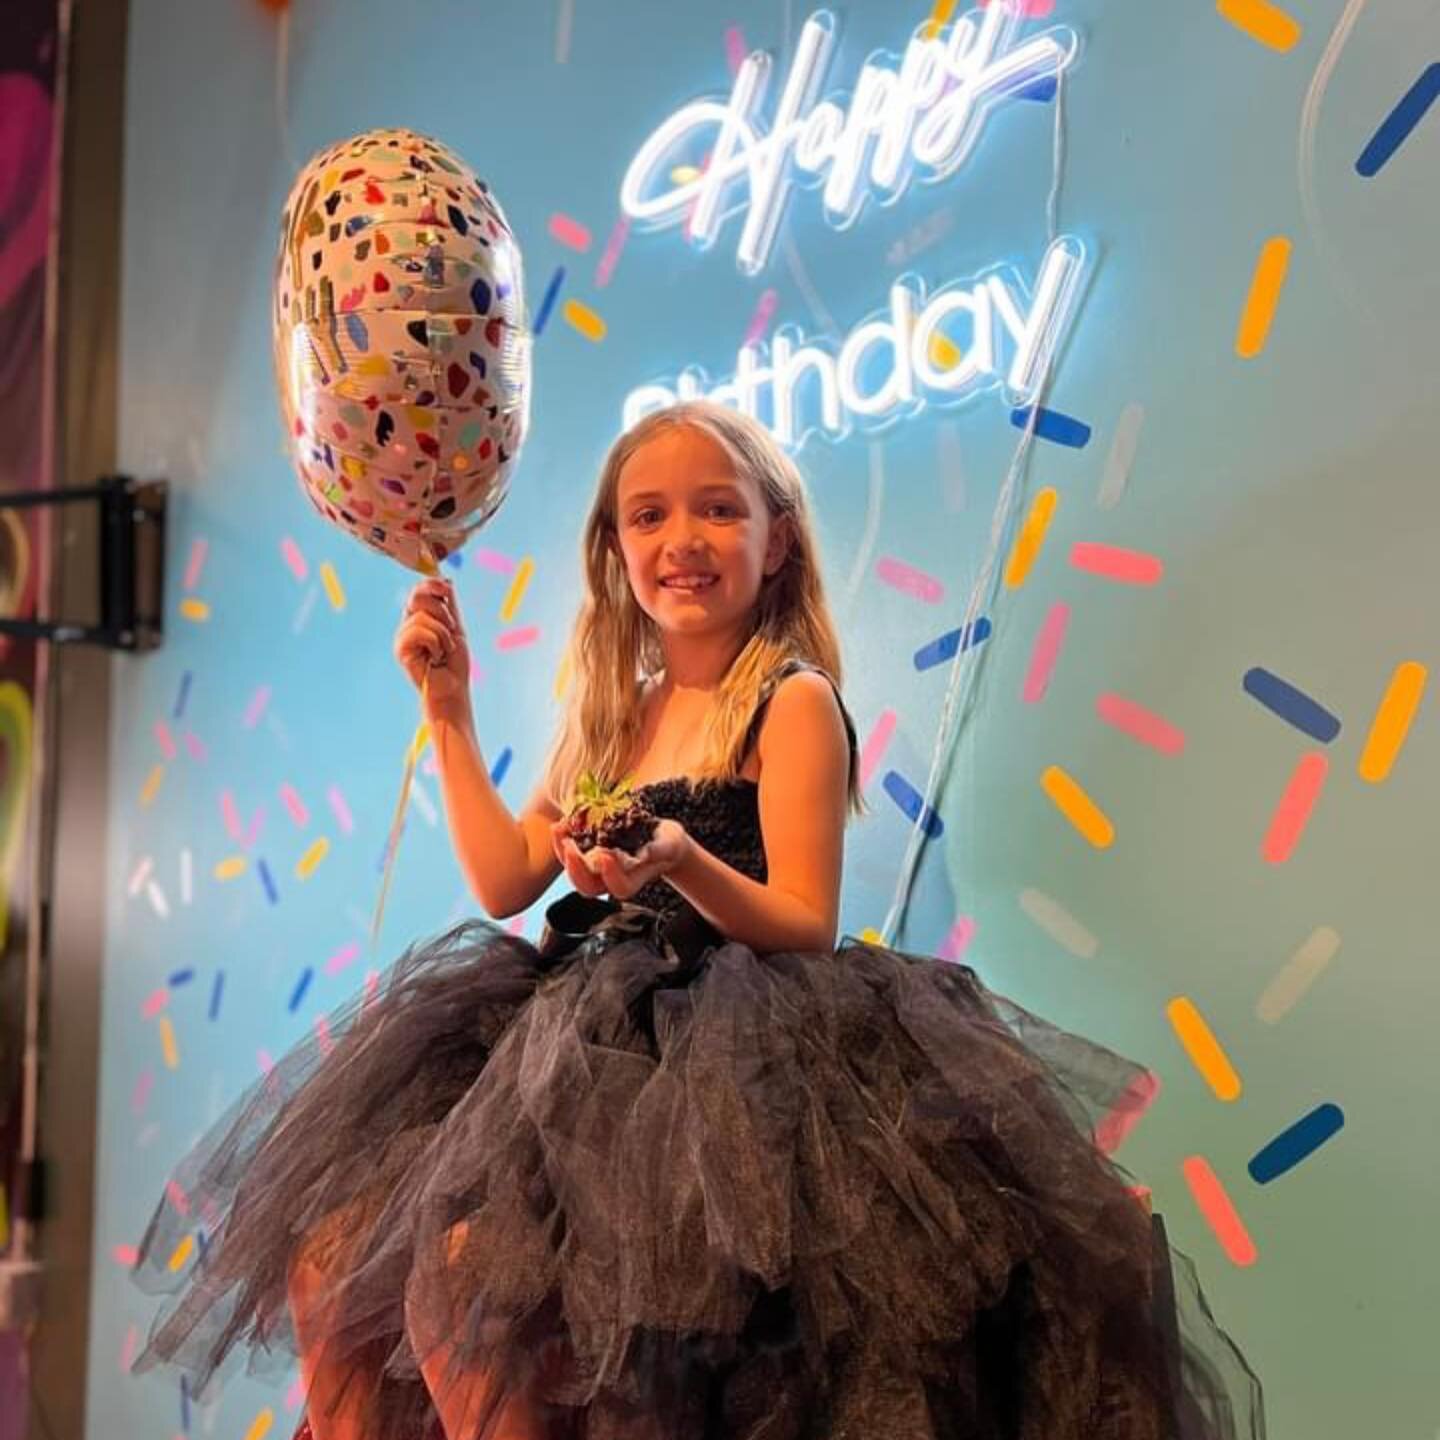 We ❤️ helping you celebrate your birthday at the Chattanooga Selfie Museum! 🥳🎉